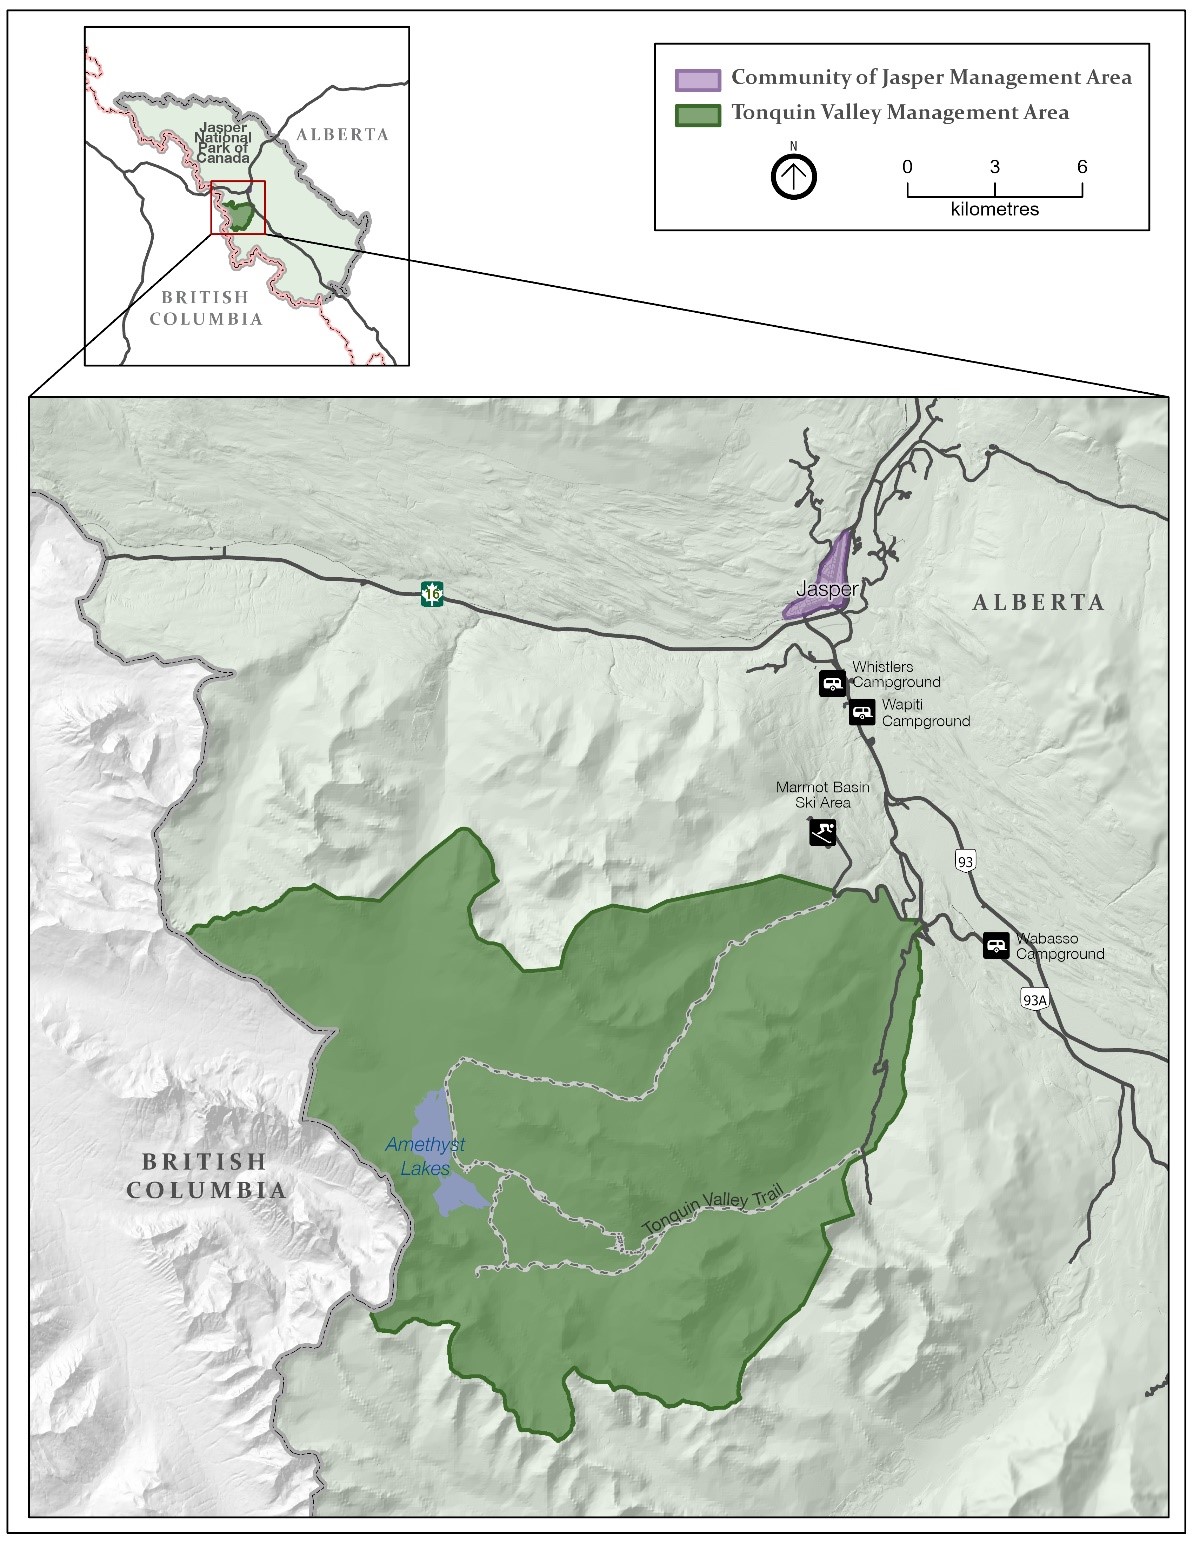 Map showing the Community of Jasper Management Area and Tonquin Valley Management Area within Jasper National Park.